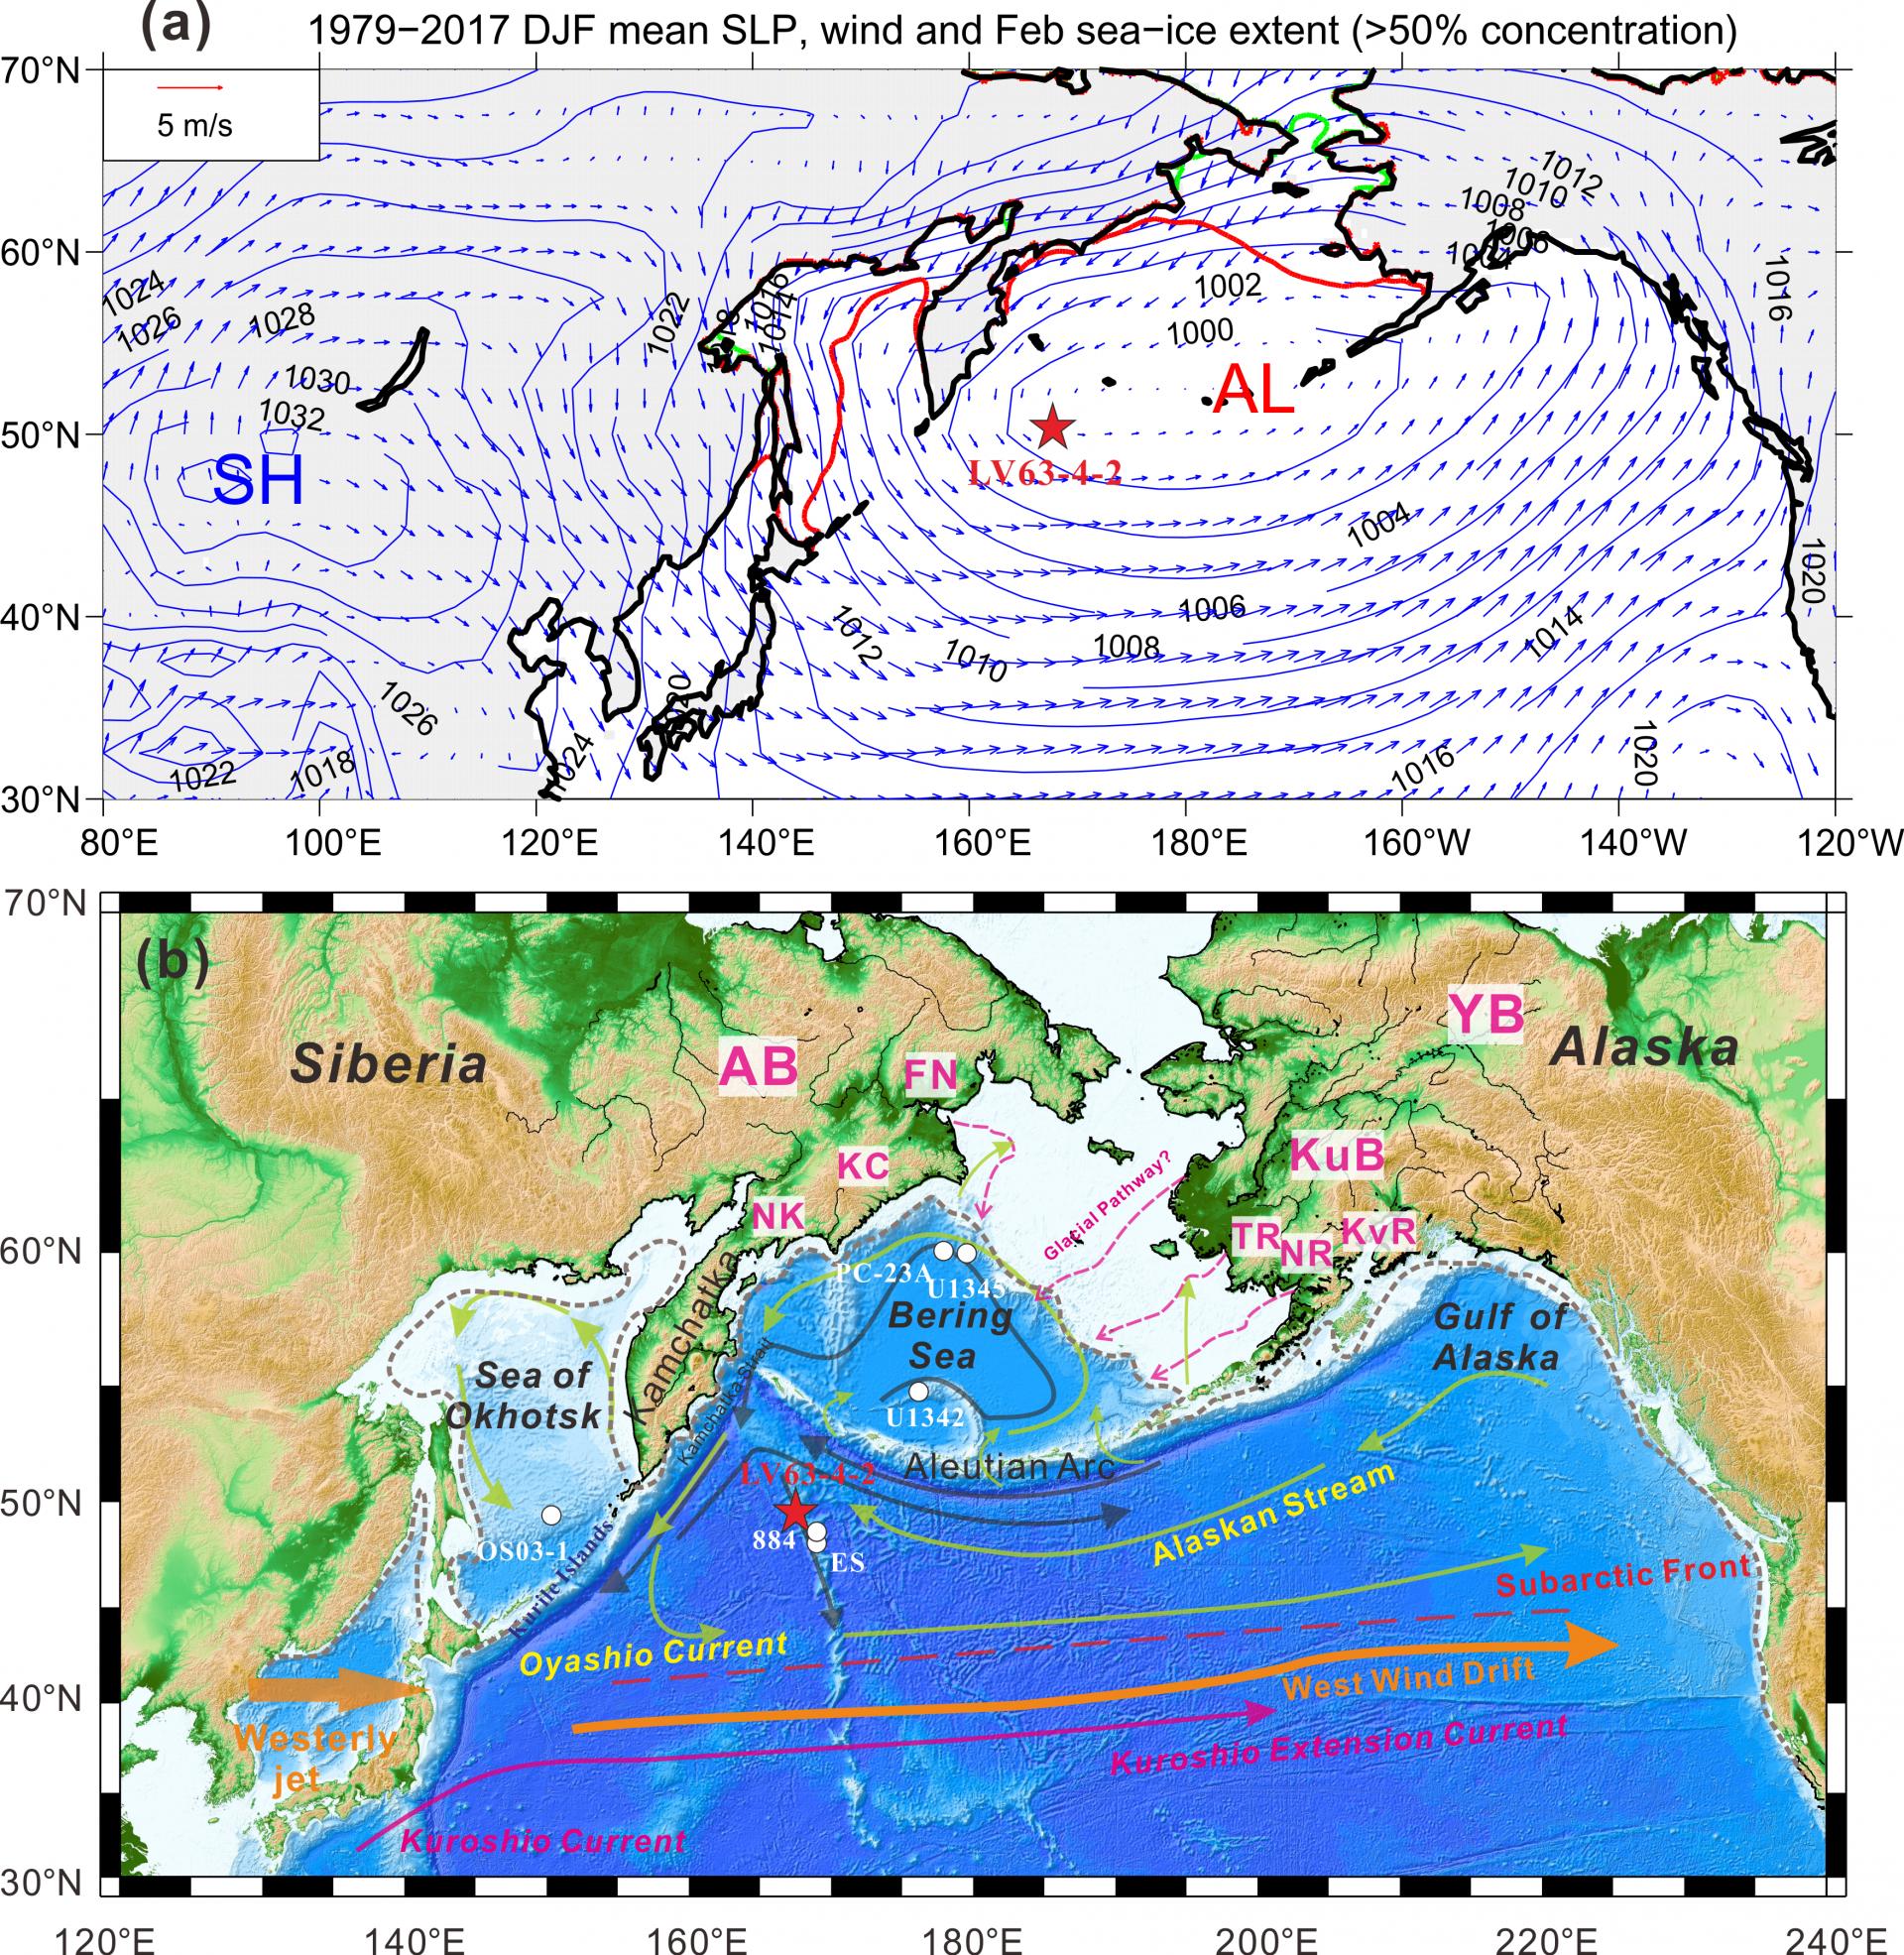 The response characteristics of the North Pacific sedimentary model ...